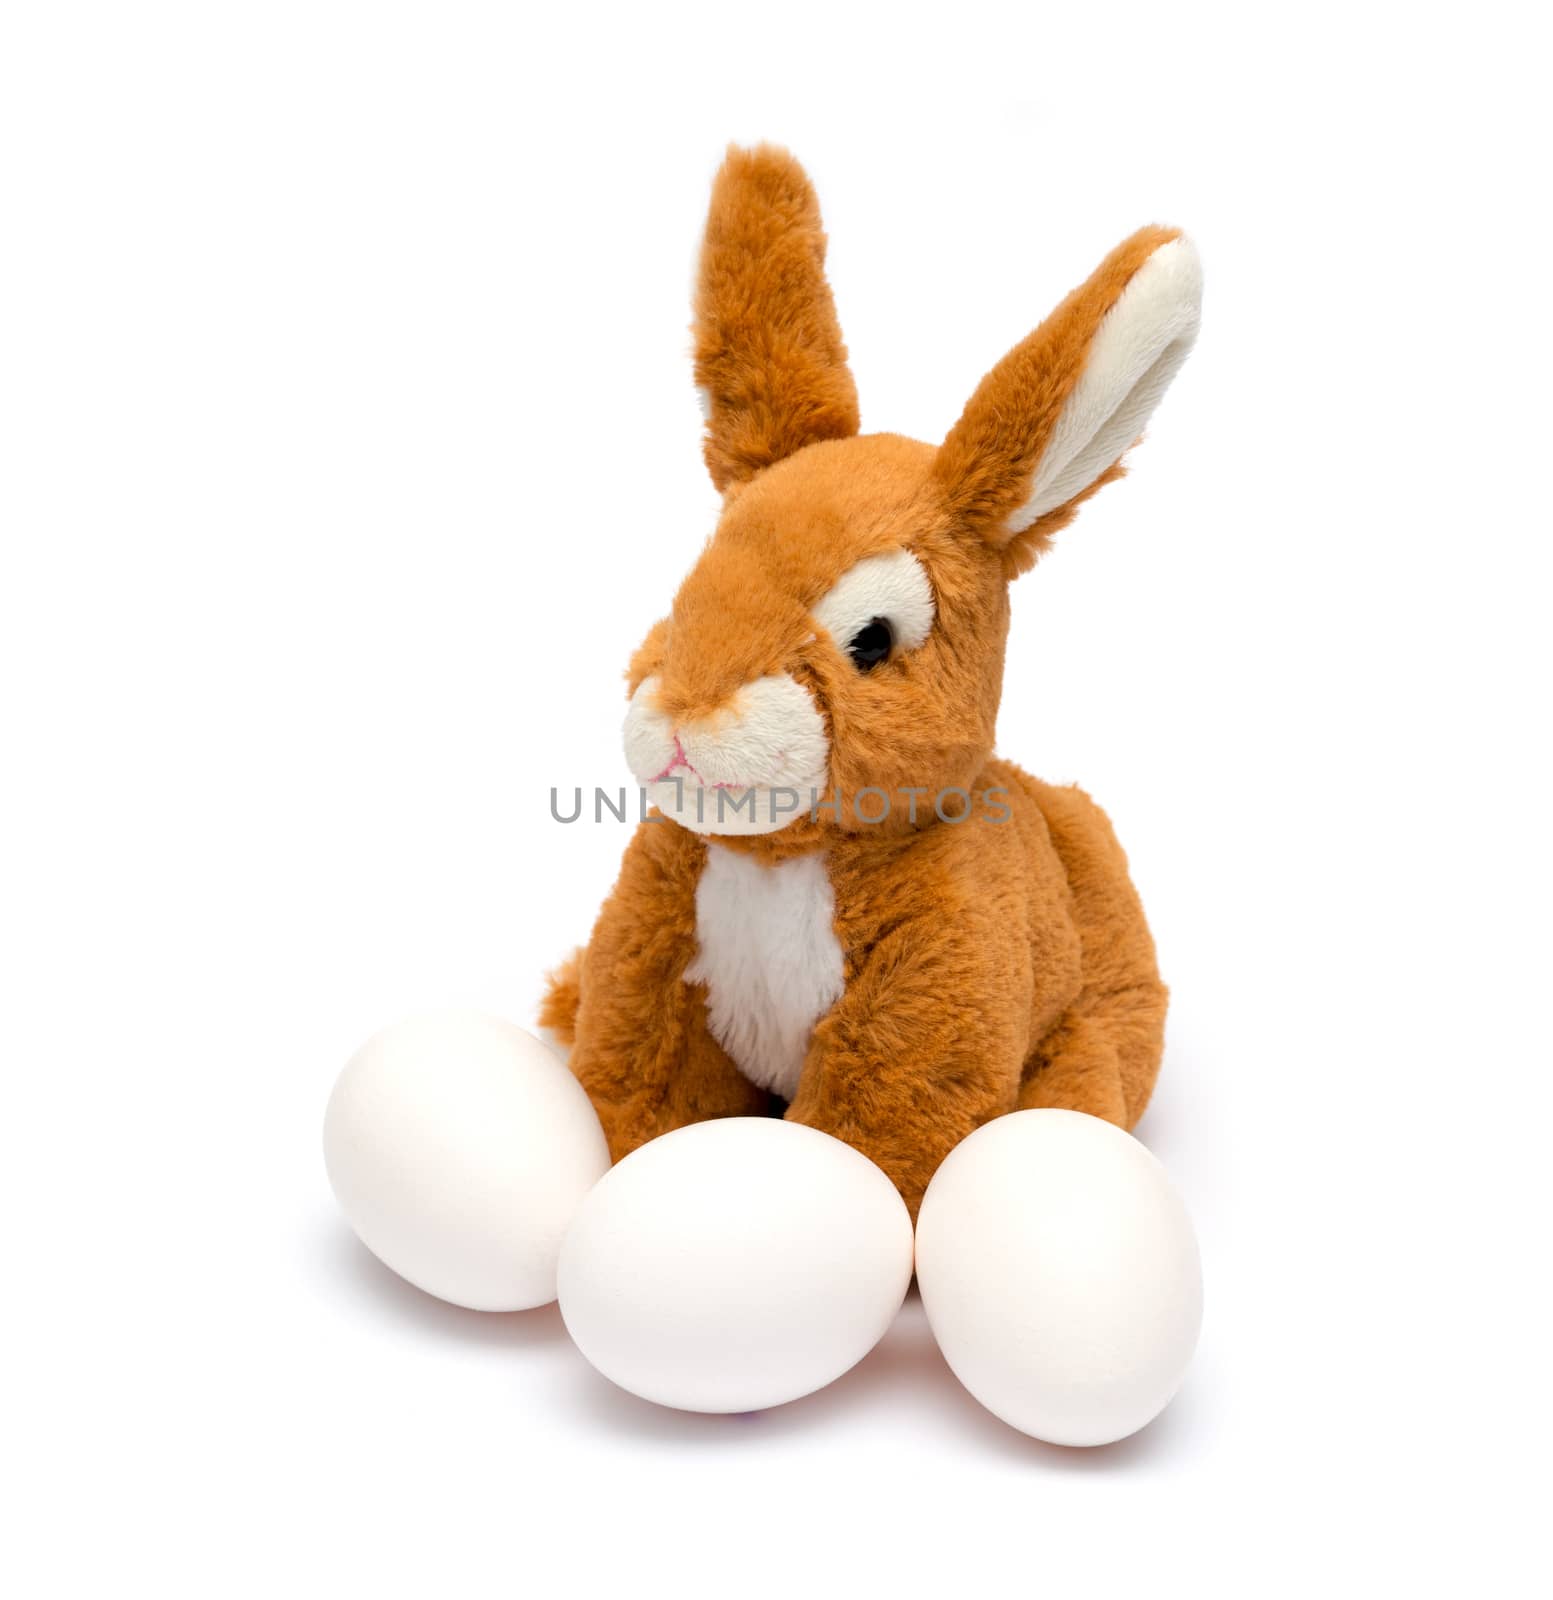 Easter rabbit and egg. Isolated on a white background. by DNKSTUDIO